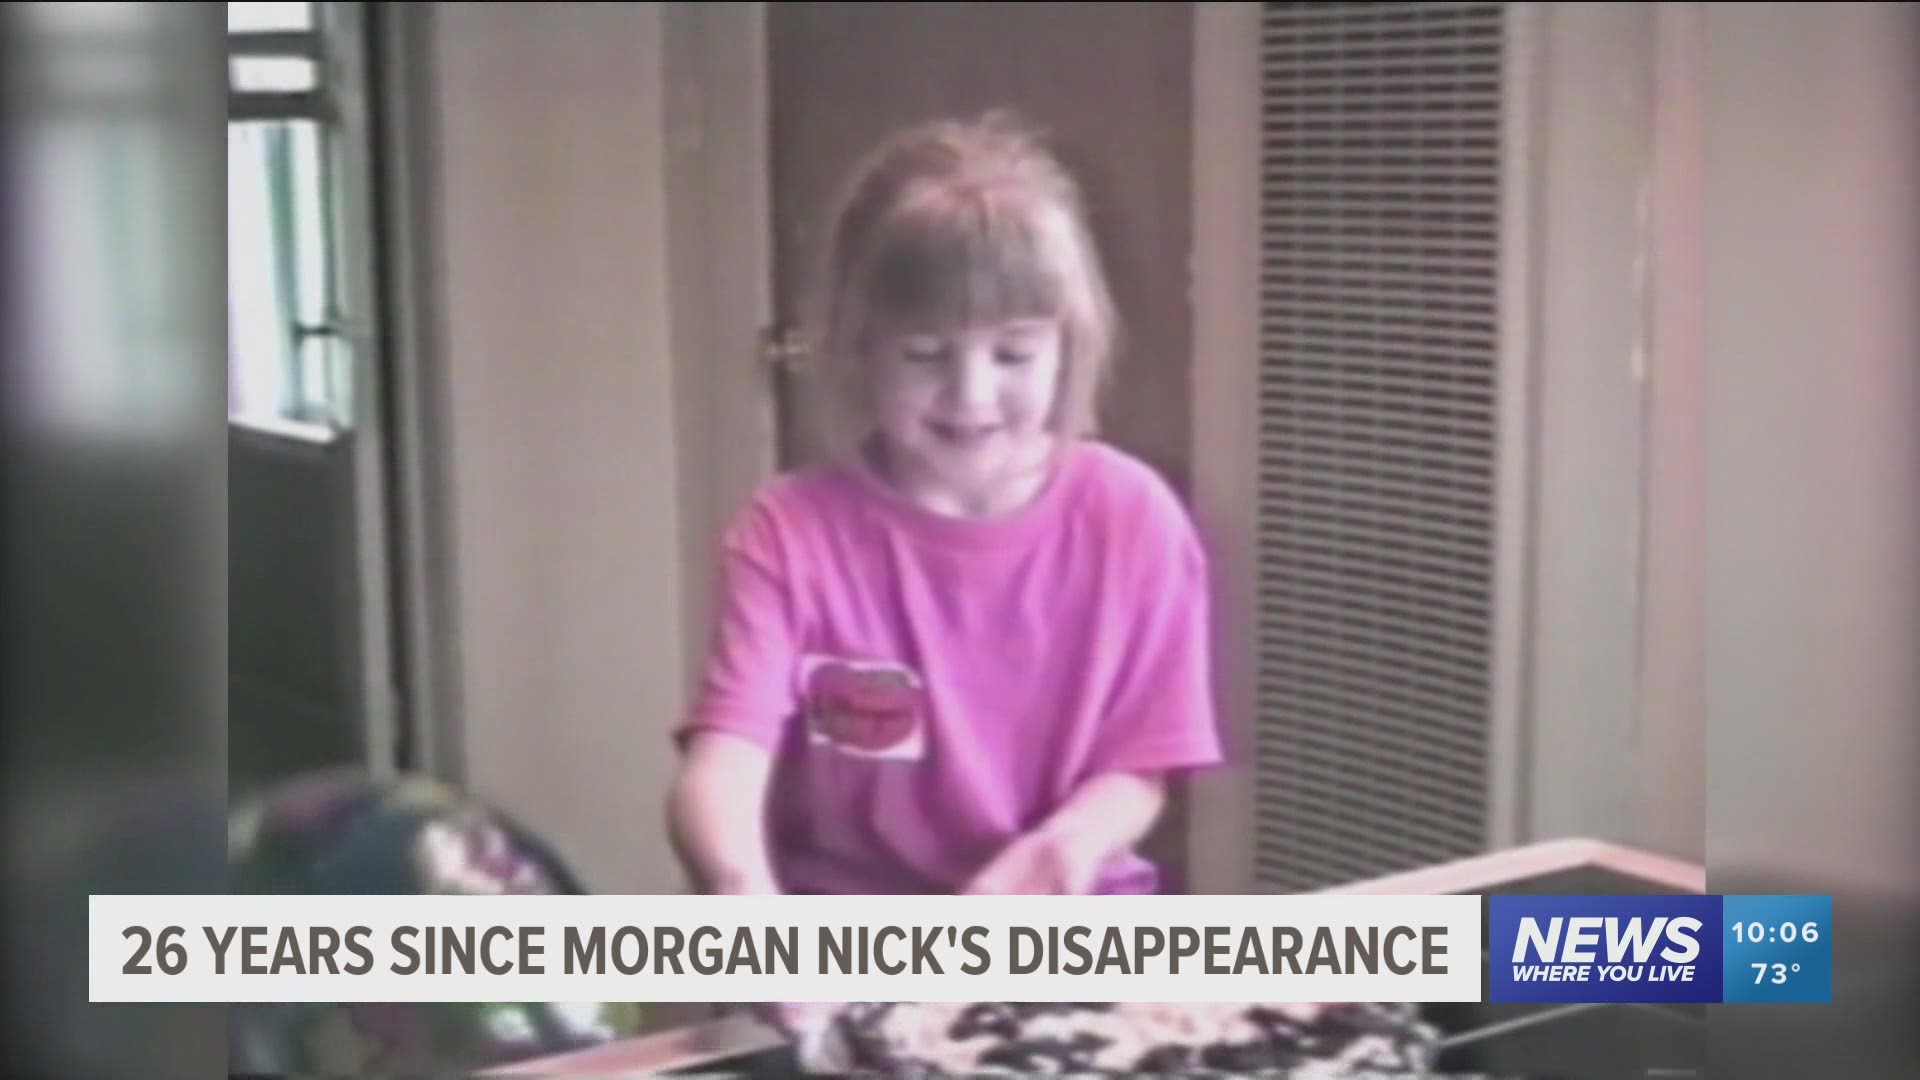 Wednesday marks 26 years since Morgan Nick's abduction in Alma.